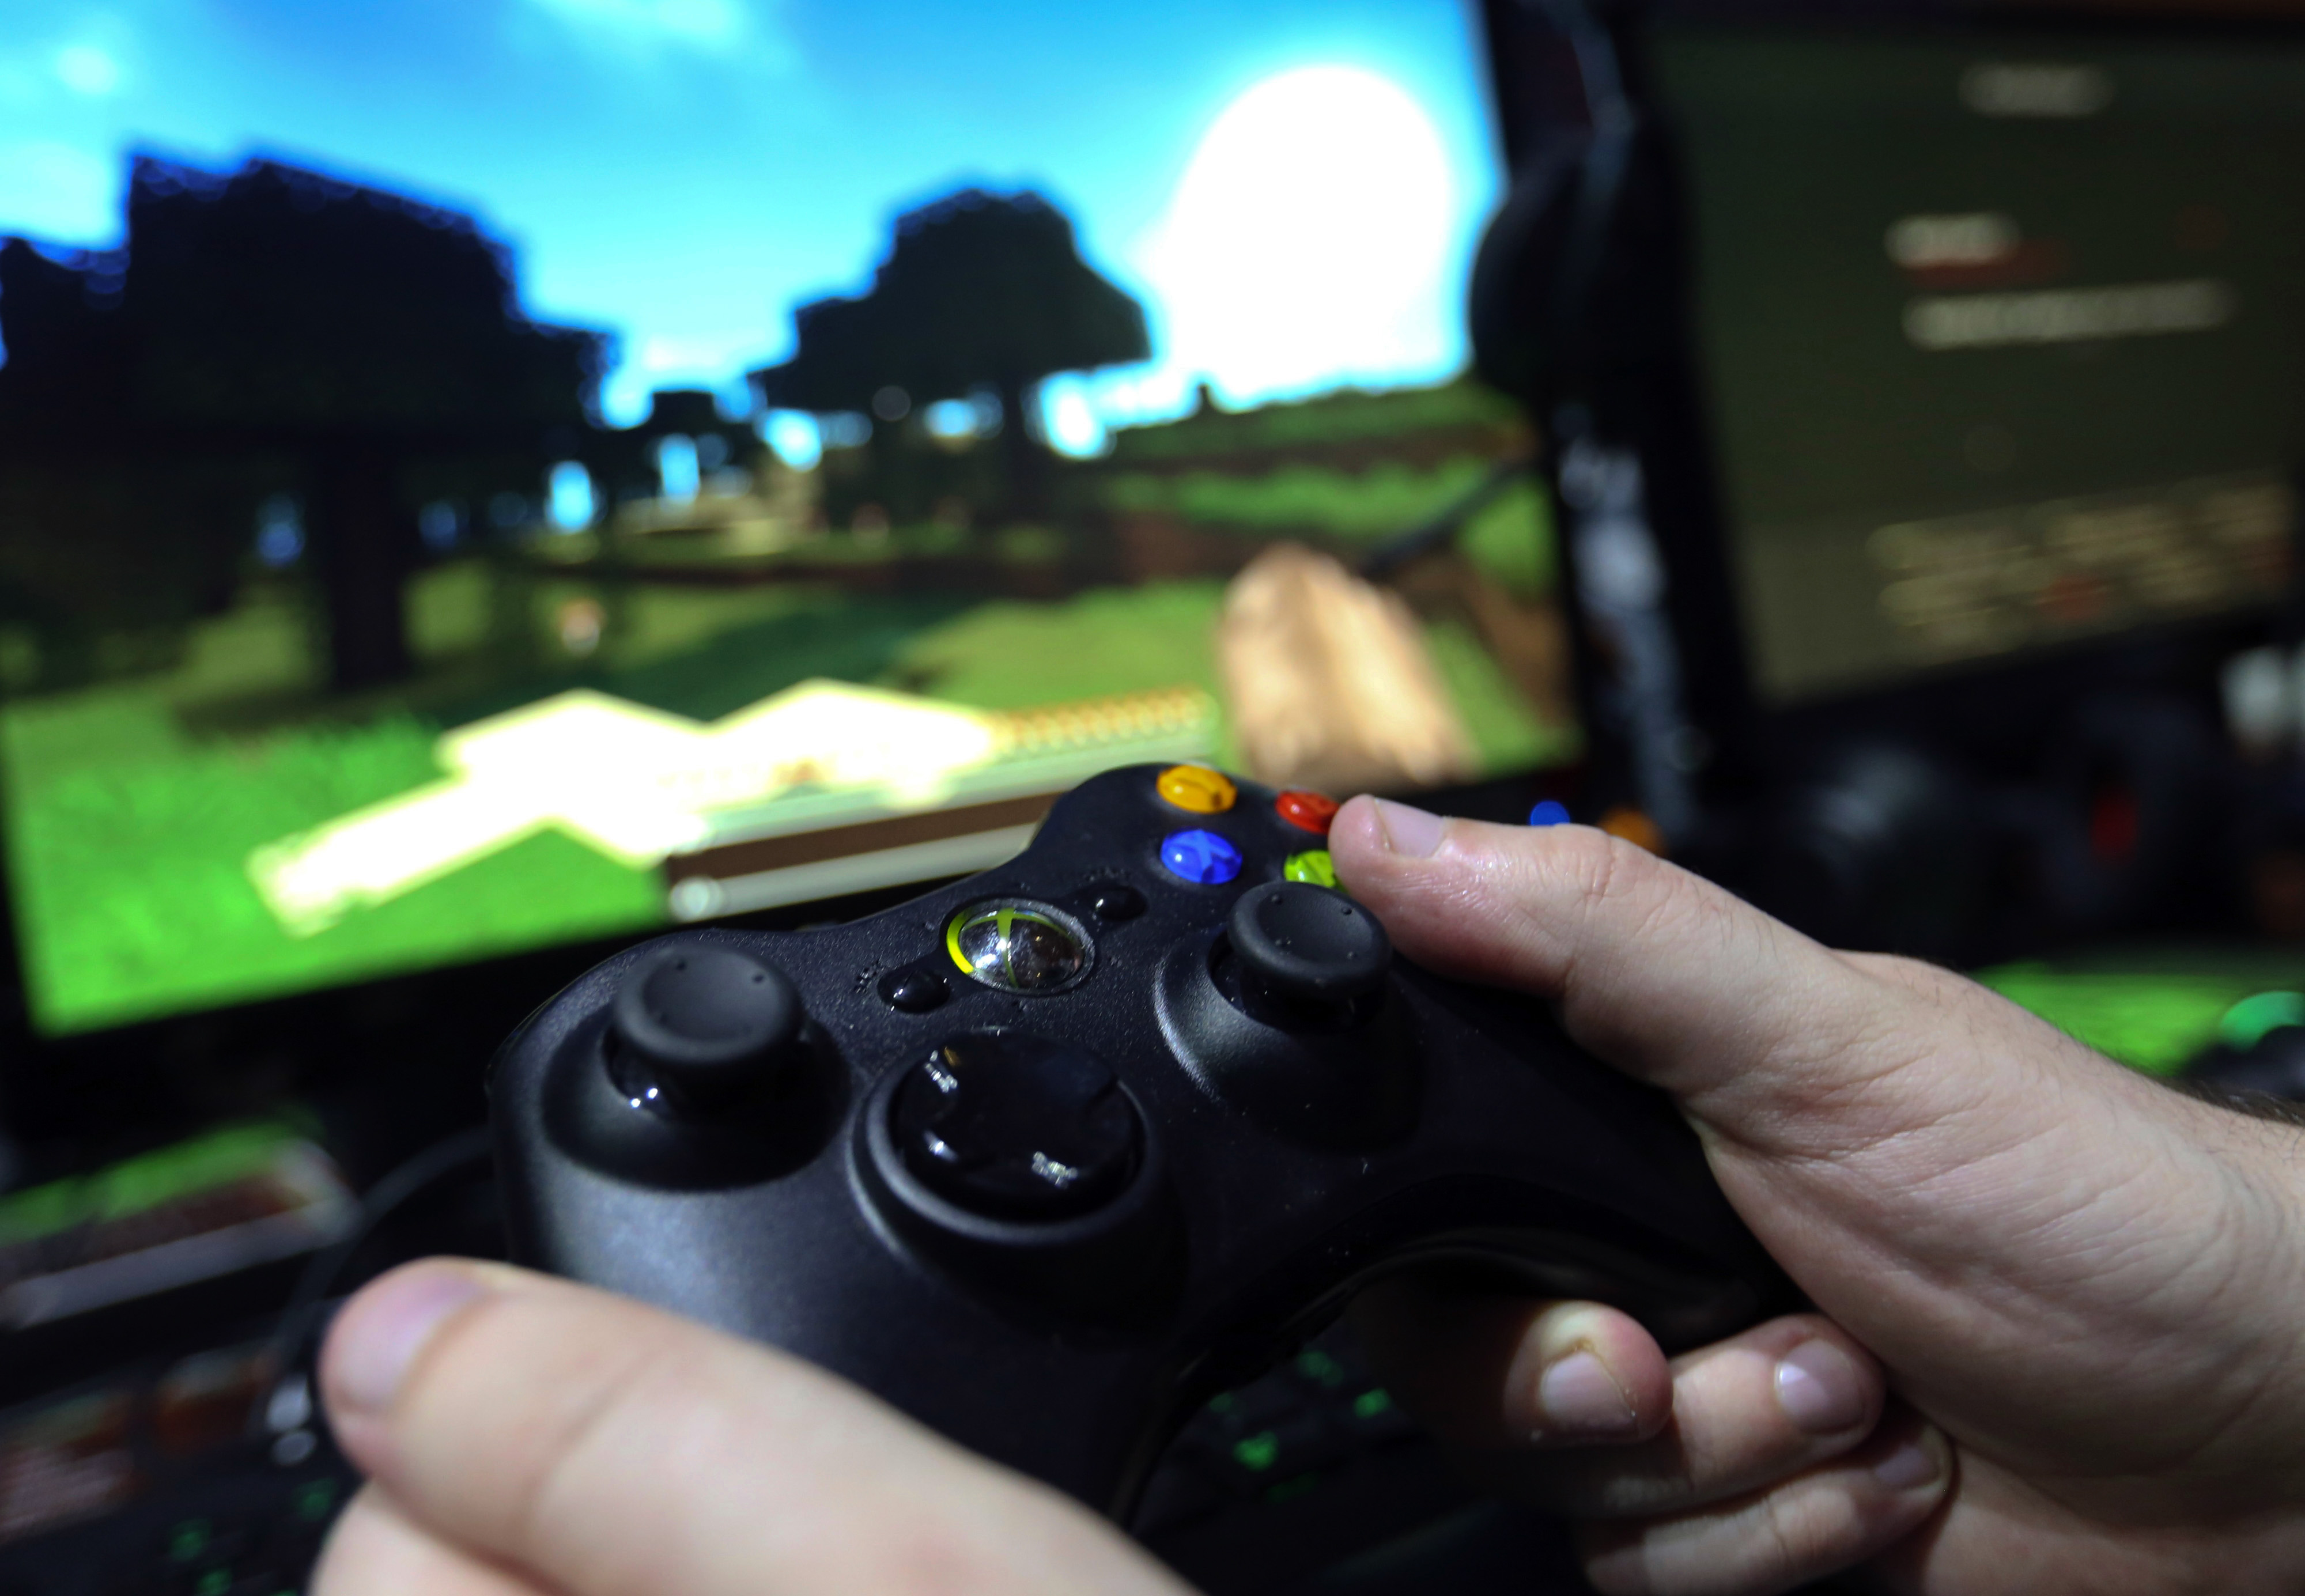 A visitor holds a hand control unit as he plays the Minecraft computer came, produced by Mojang AB, on a Microsoft Corp. Xbox One games consoles during the EGX gaming conference at Earls Court in London, U.K., on Sept. 25, 2014. (Bloomberg via Getty Images)